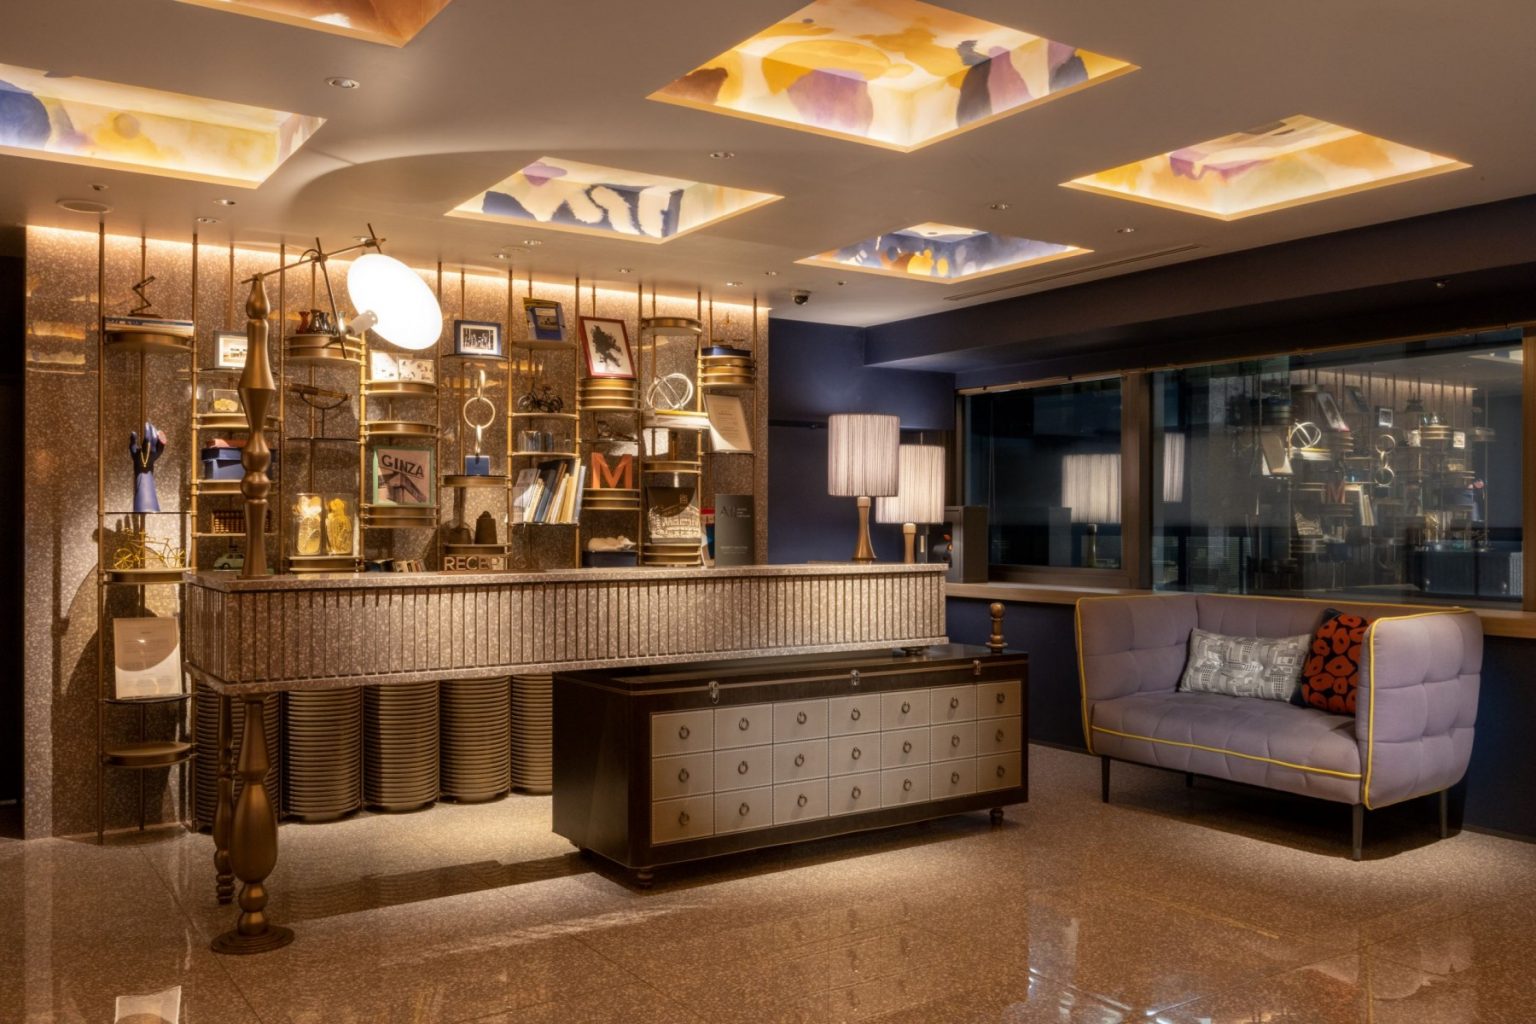 MERCURE TOKYO GINZA - Official Page - Direct access from Metro